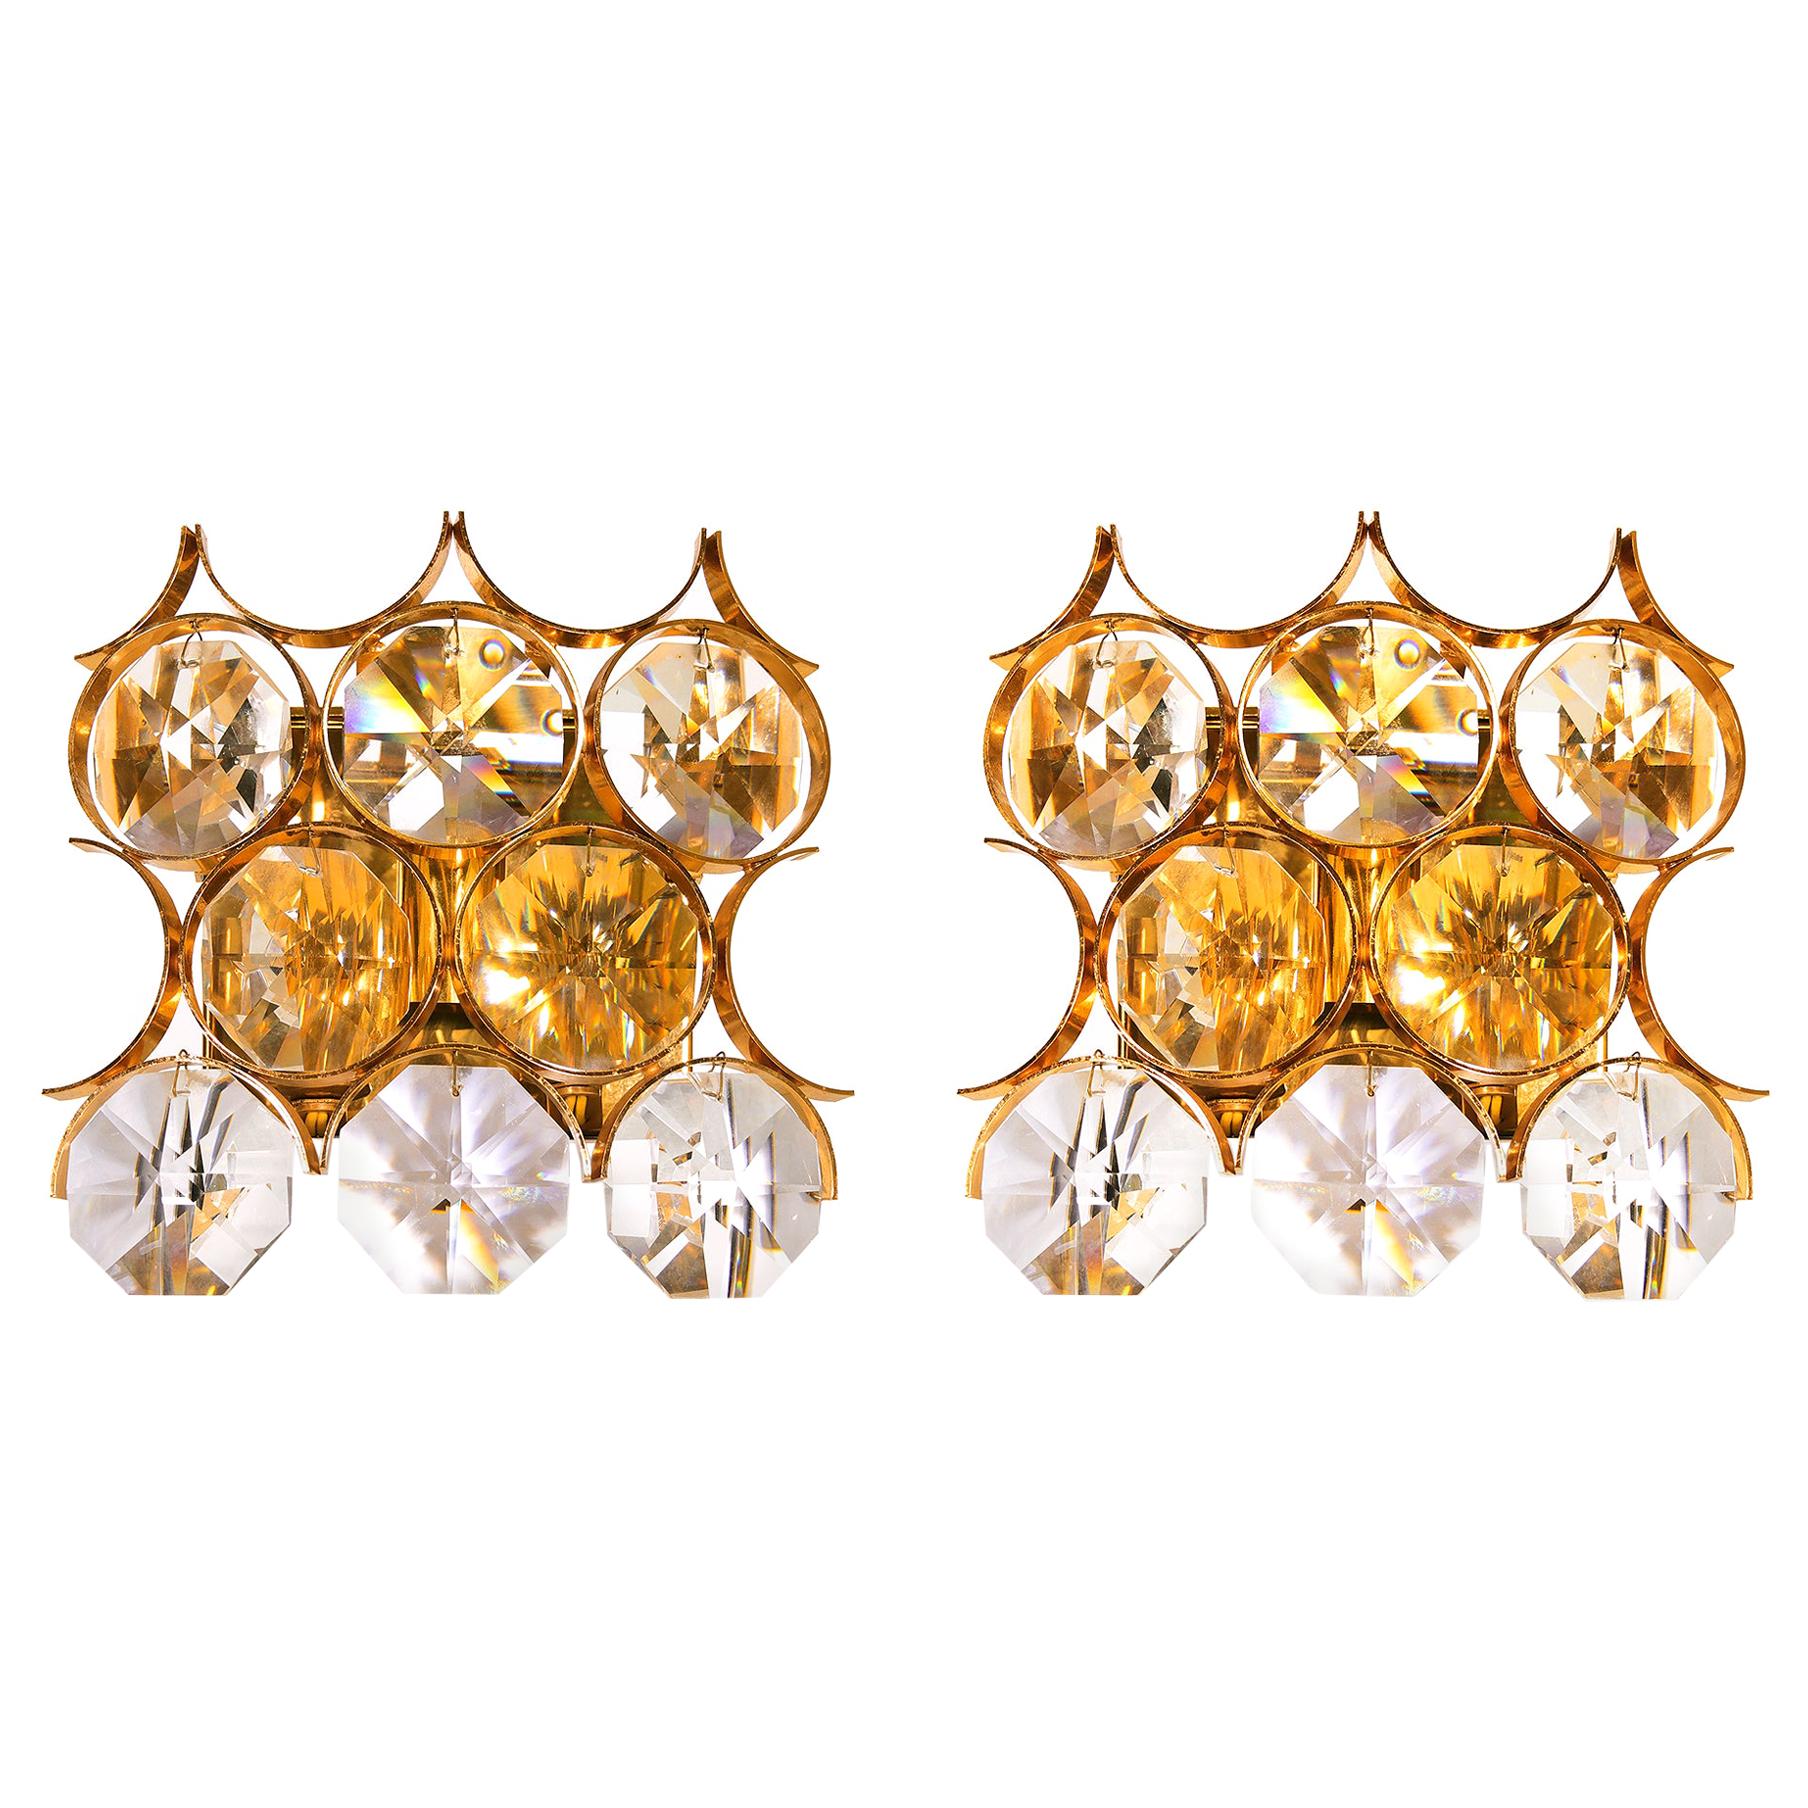 1960 Germany Palwa Pair of Wall Sconces Crystal Glass & Gilt Brass